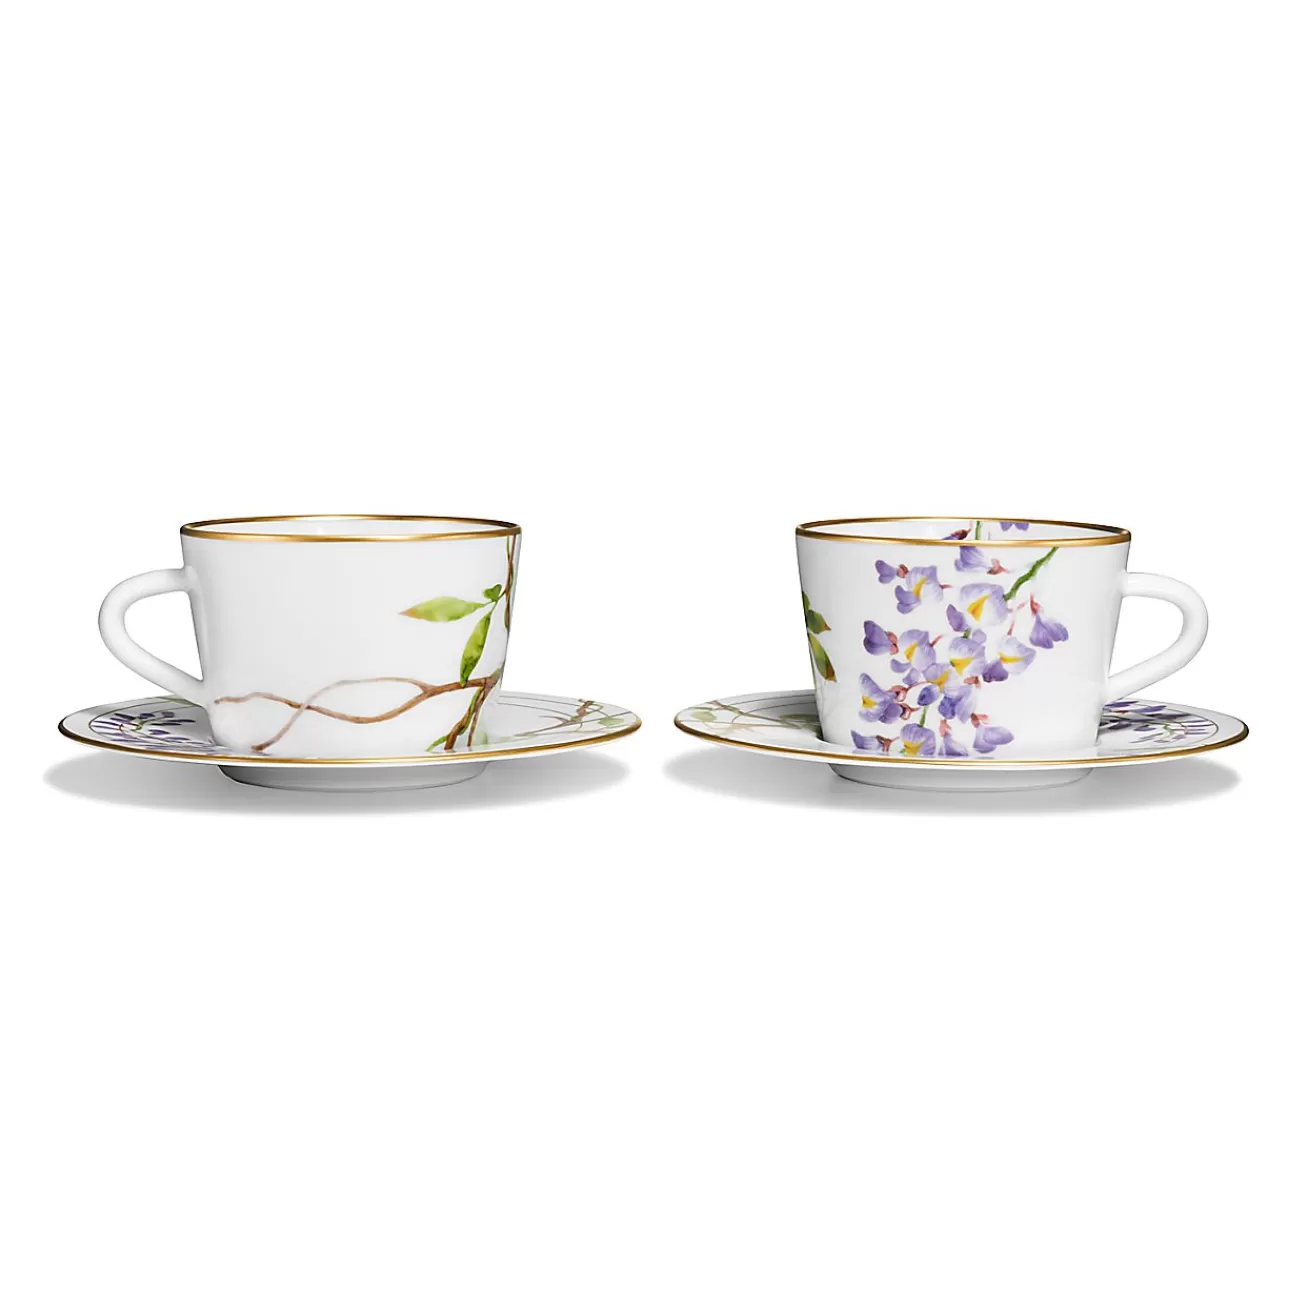 Tiffany & Co. Tiffany Wisteria Teacup and Saucer Set of Two, in Porcelain | ^ The Home | Housewarming Gifts